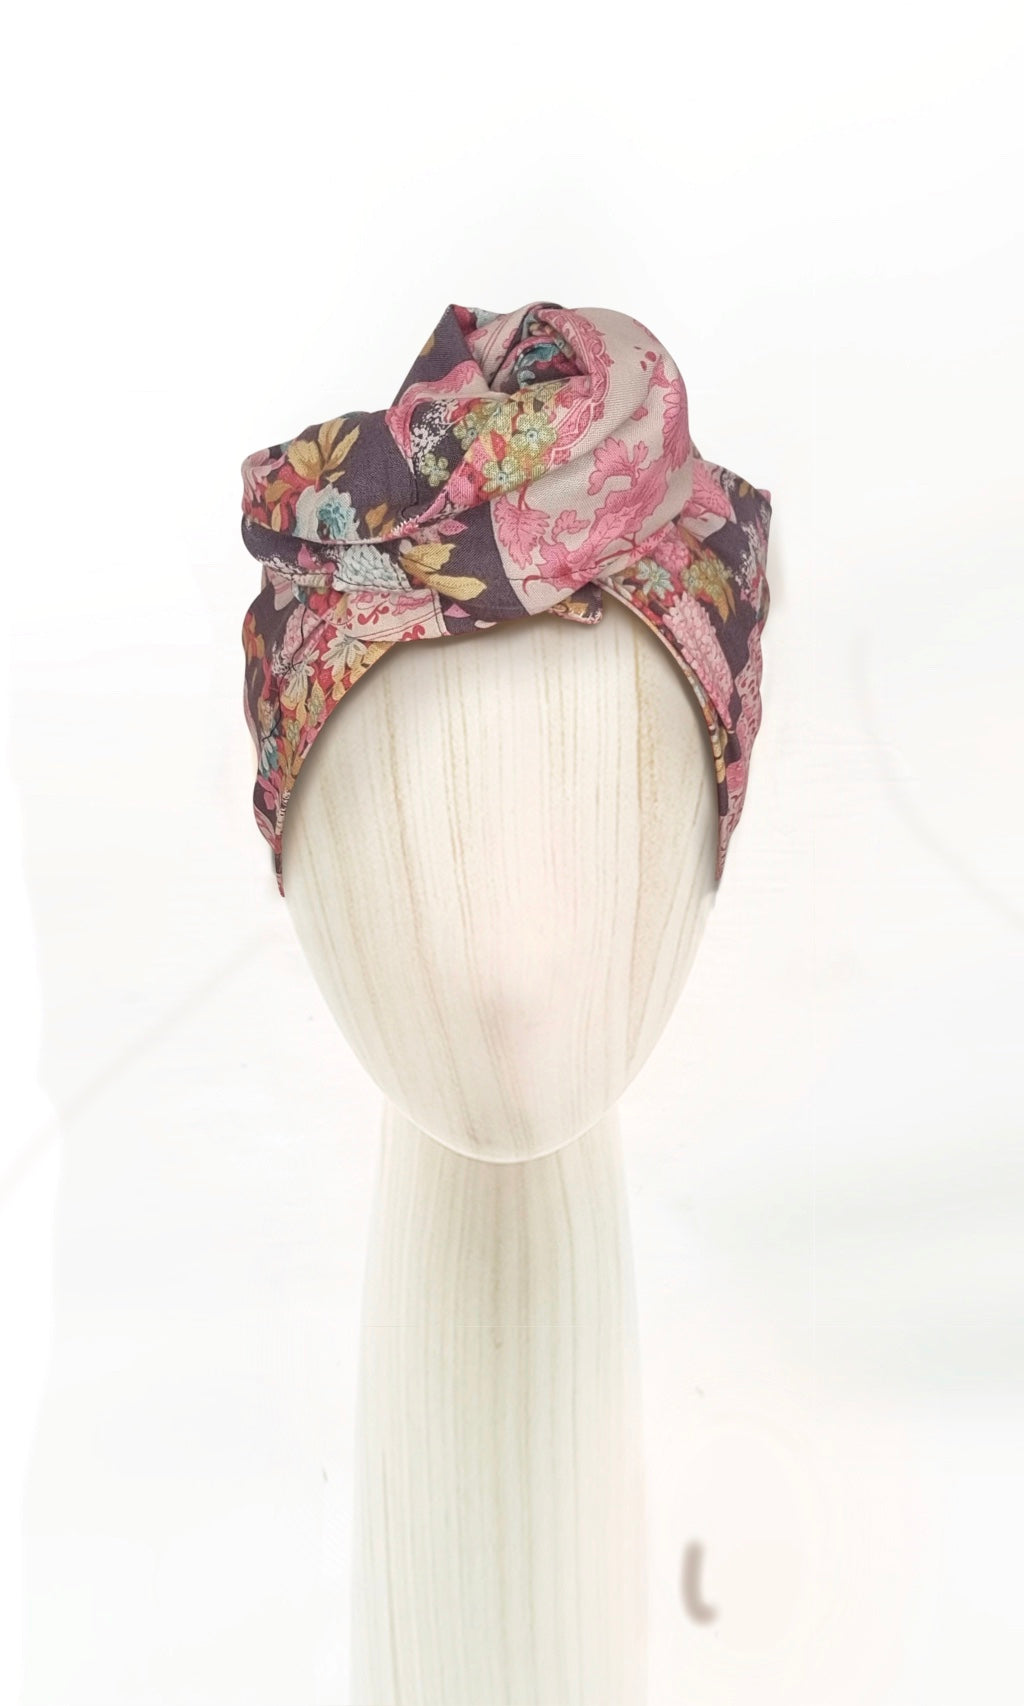 The Celine Martine wired head wrap in Flowervae grey displayed on a mannequin head styled in one of several hair scarf options